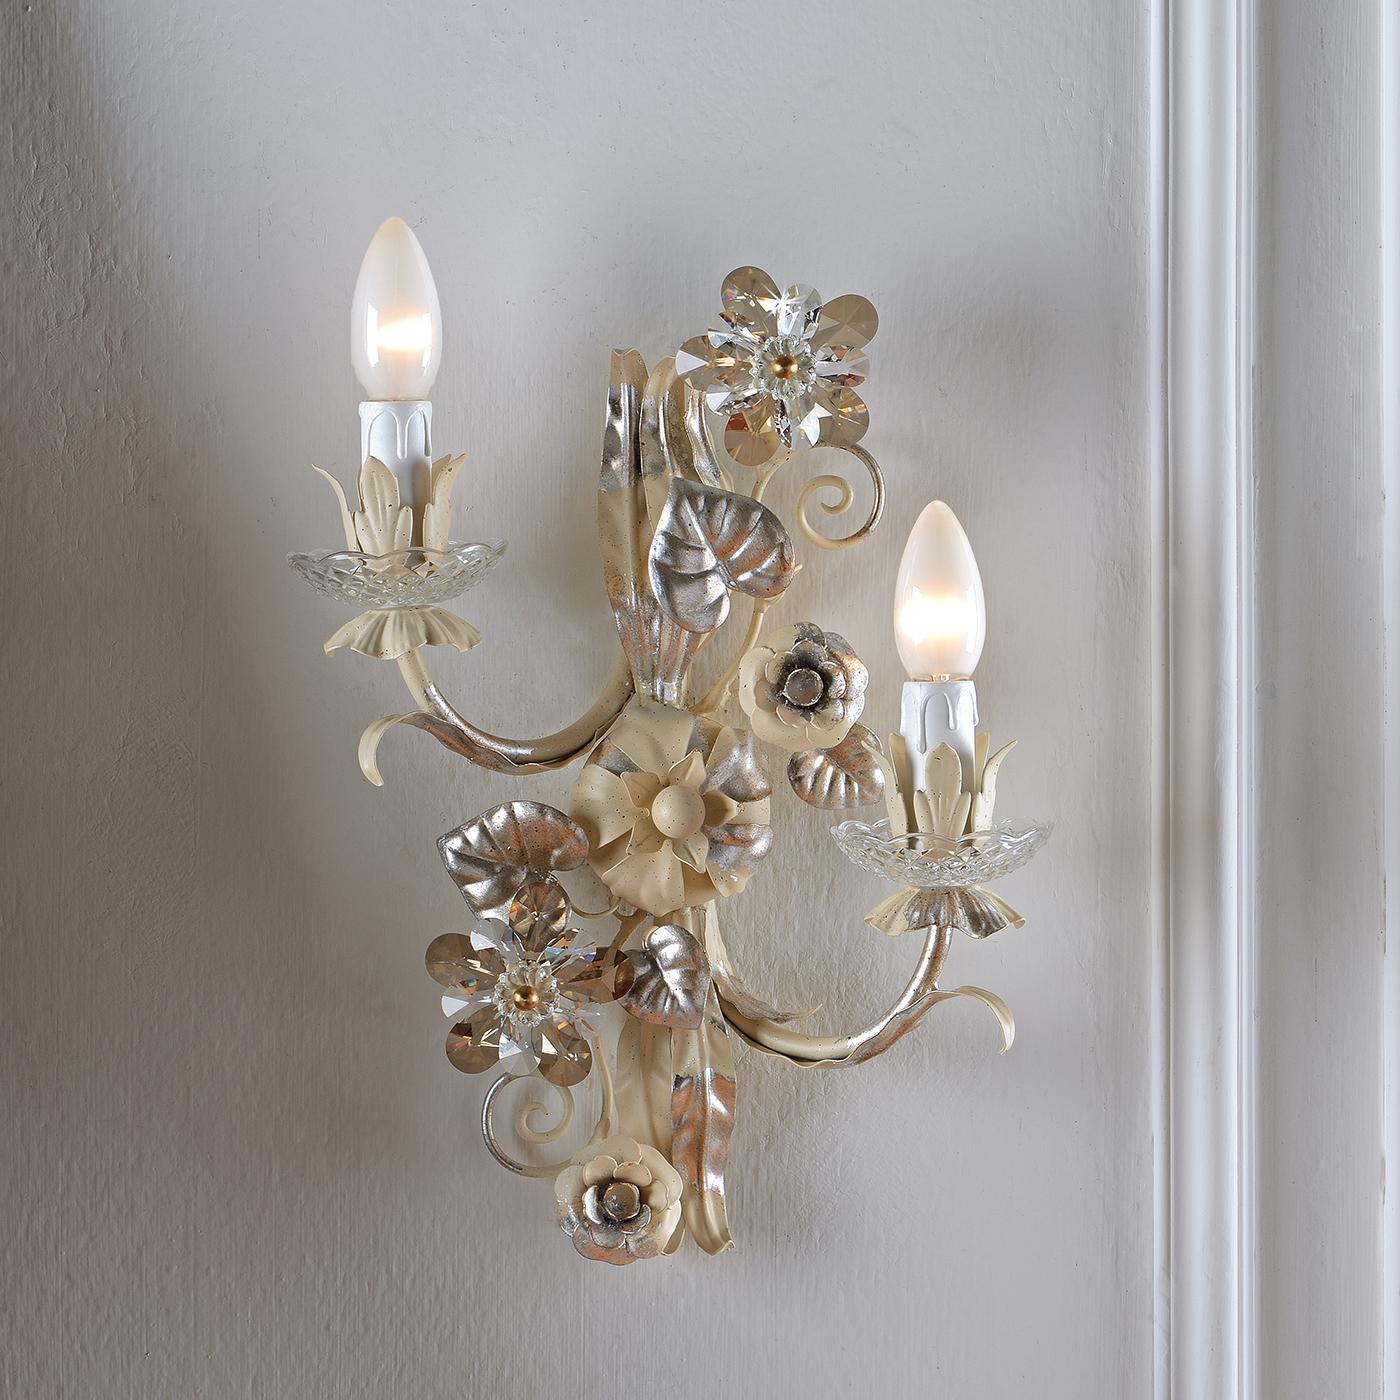 A charming applique, inspired by Italian tradition and nature. Made in metal, the applique is coated with a ivory finish and accented with silver leaf. Completing the applique are Asfour crystal flowers, in transparent and smoky tones. Perfect for